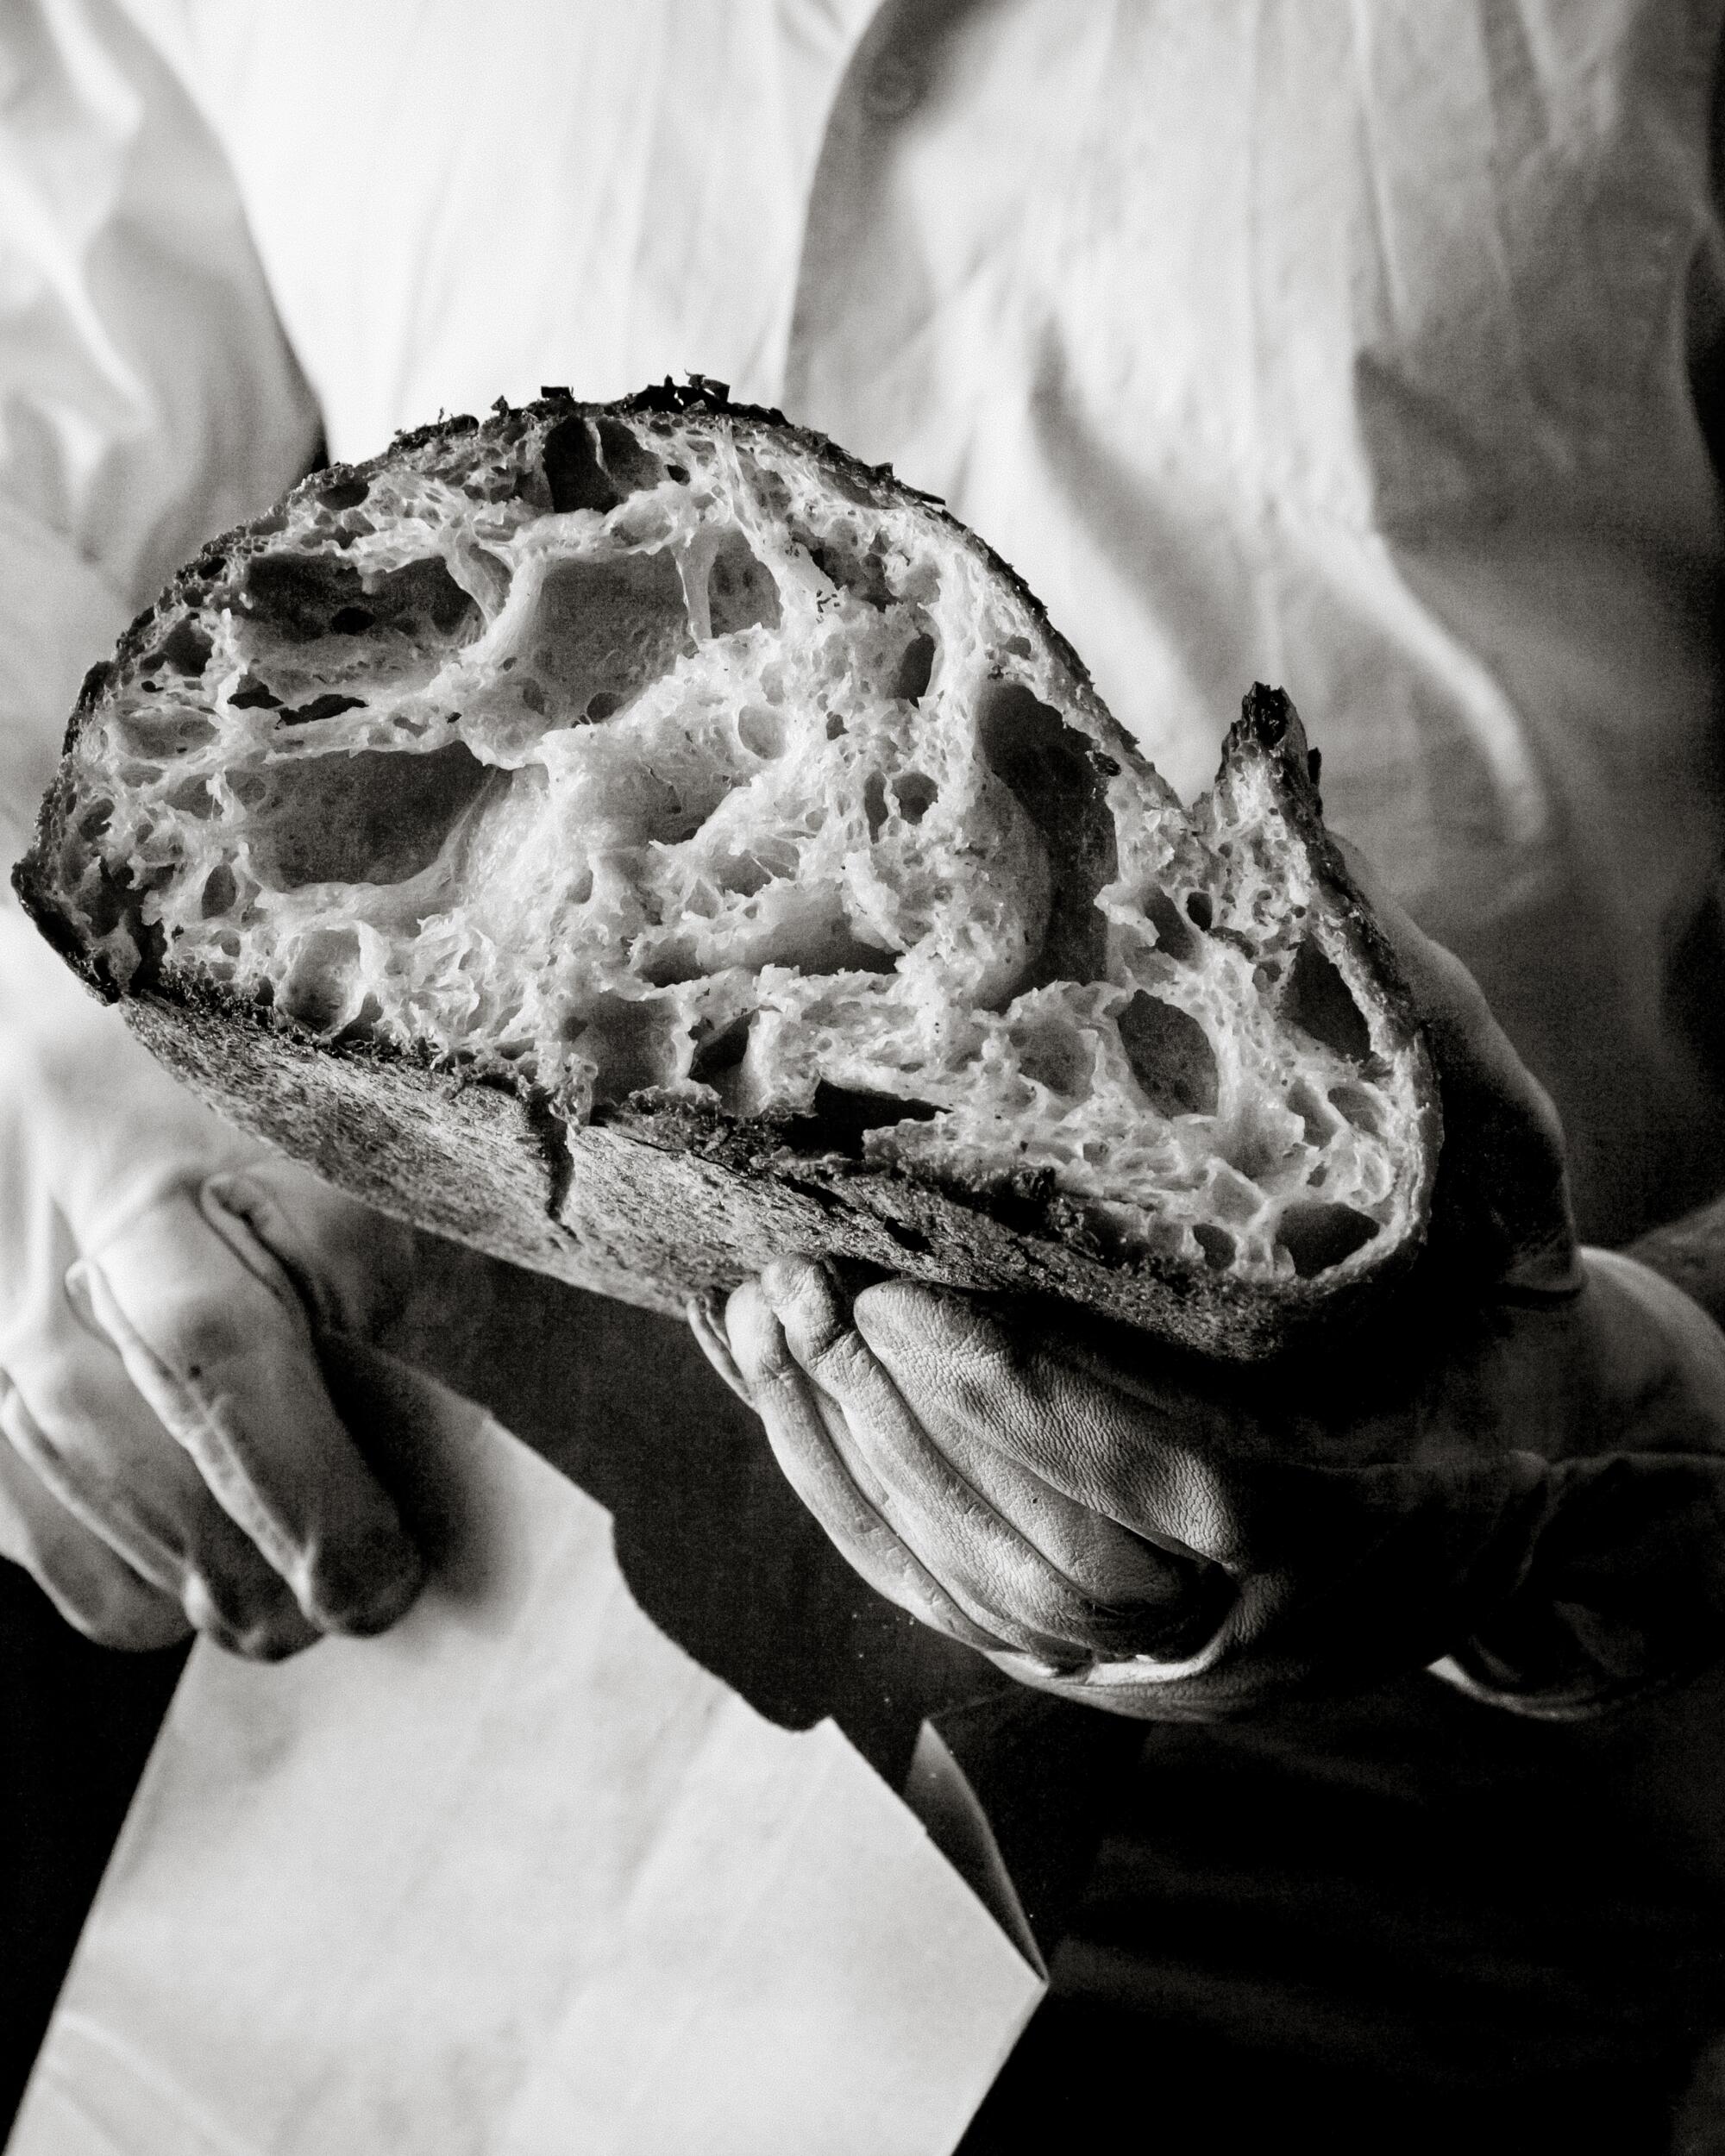 Eric Wolfinger took this photo of a sourdough loaf for Chad Robertson's "Tartine Bread" cookbook.